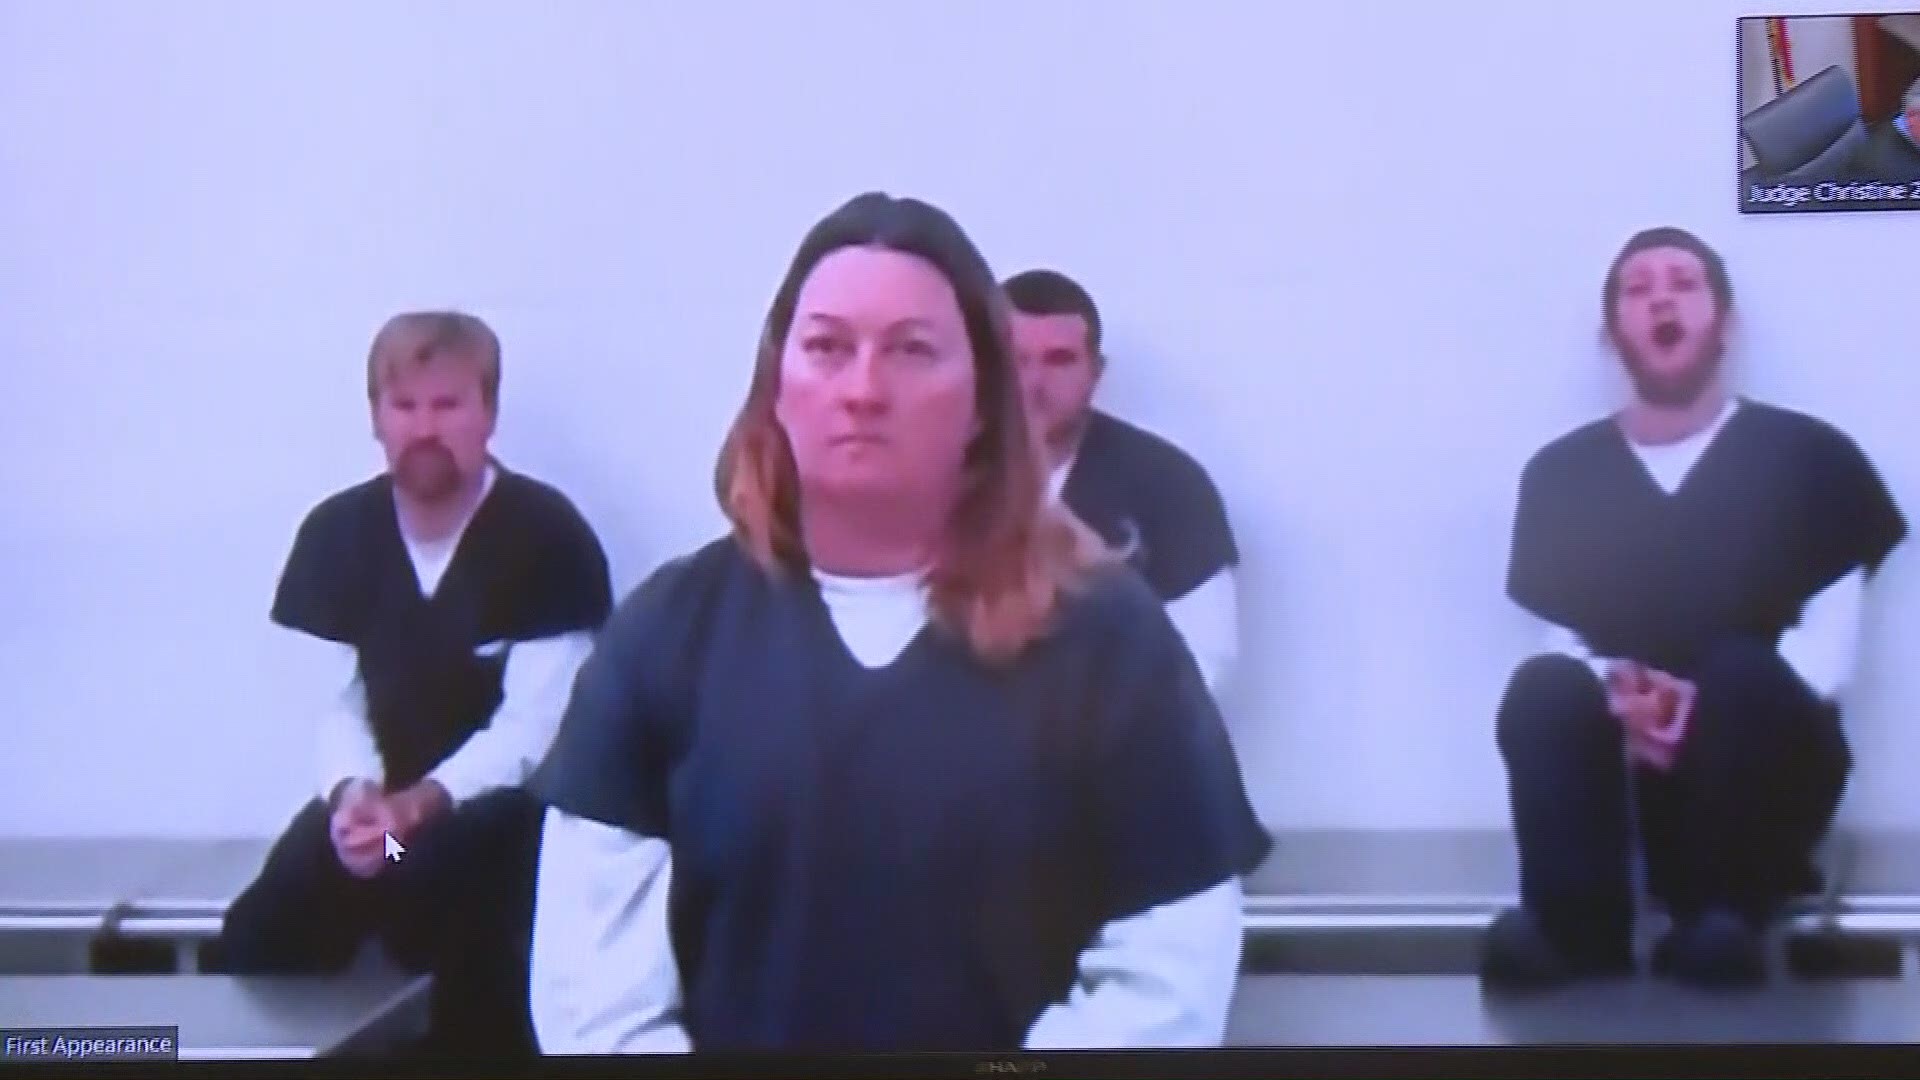 A judge set a bond of $100,000 Monday for the woman accused of a DUI crash that killed a Jacksonville Sheriff's Office employee and seriously injured a JSO officer over the weekend.